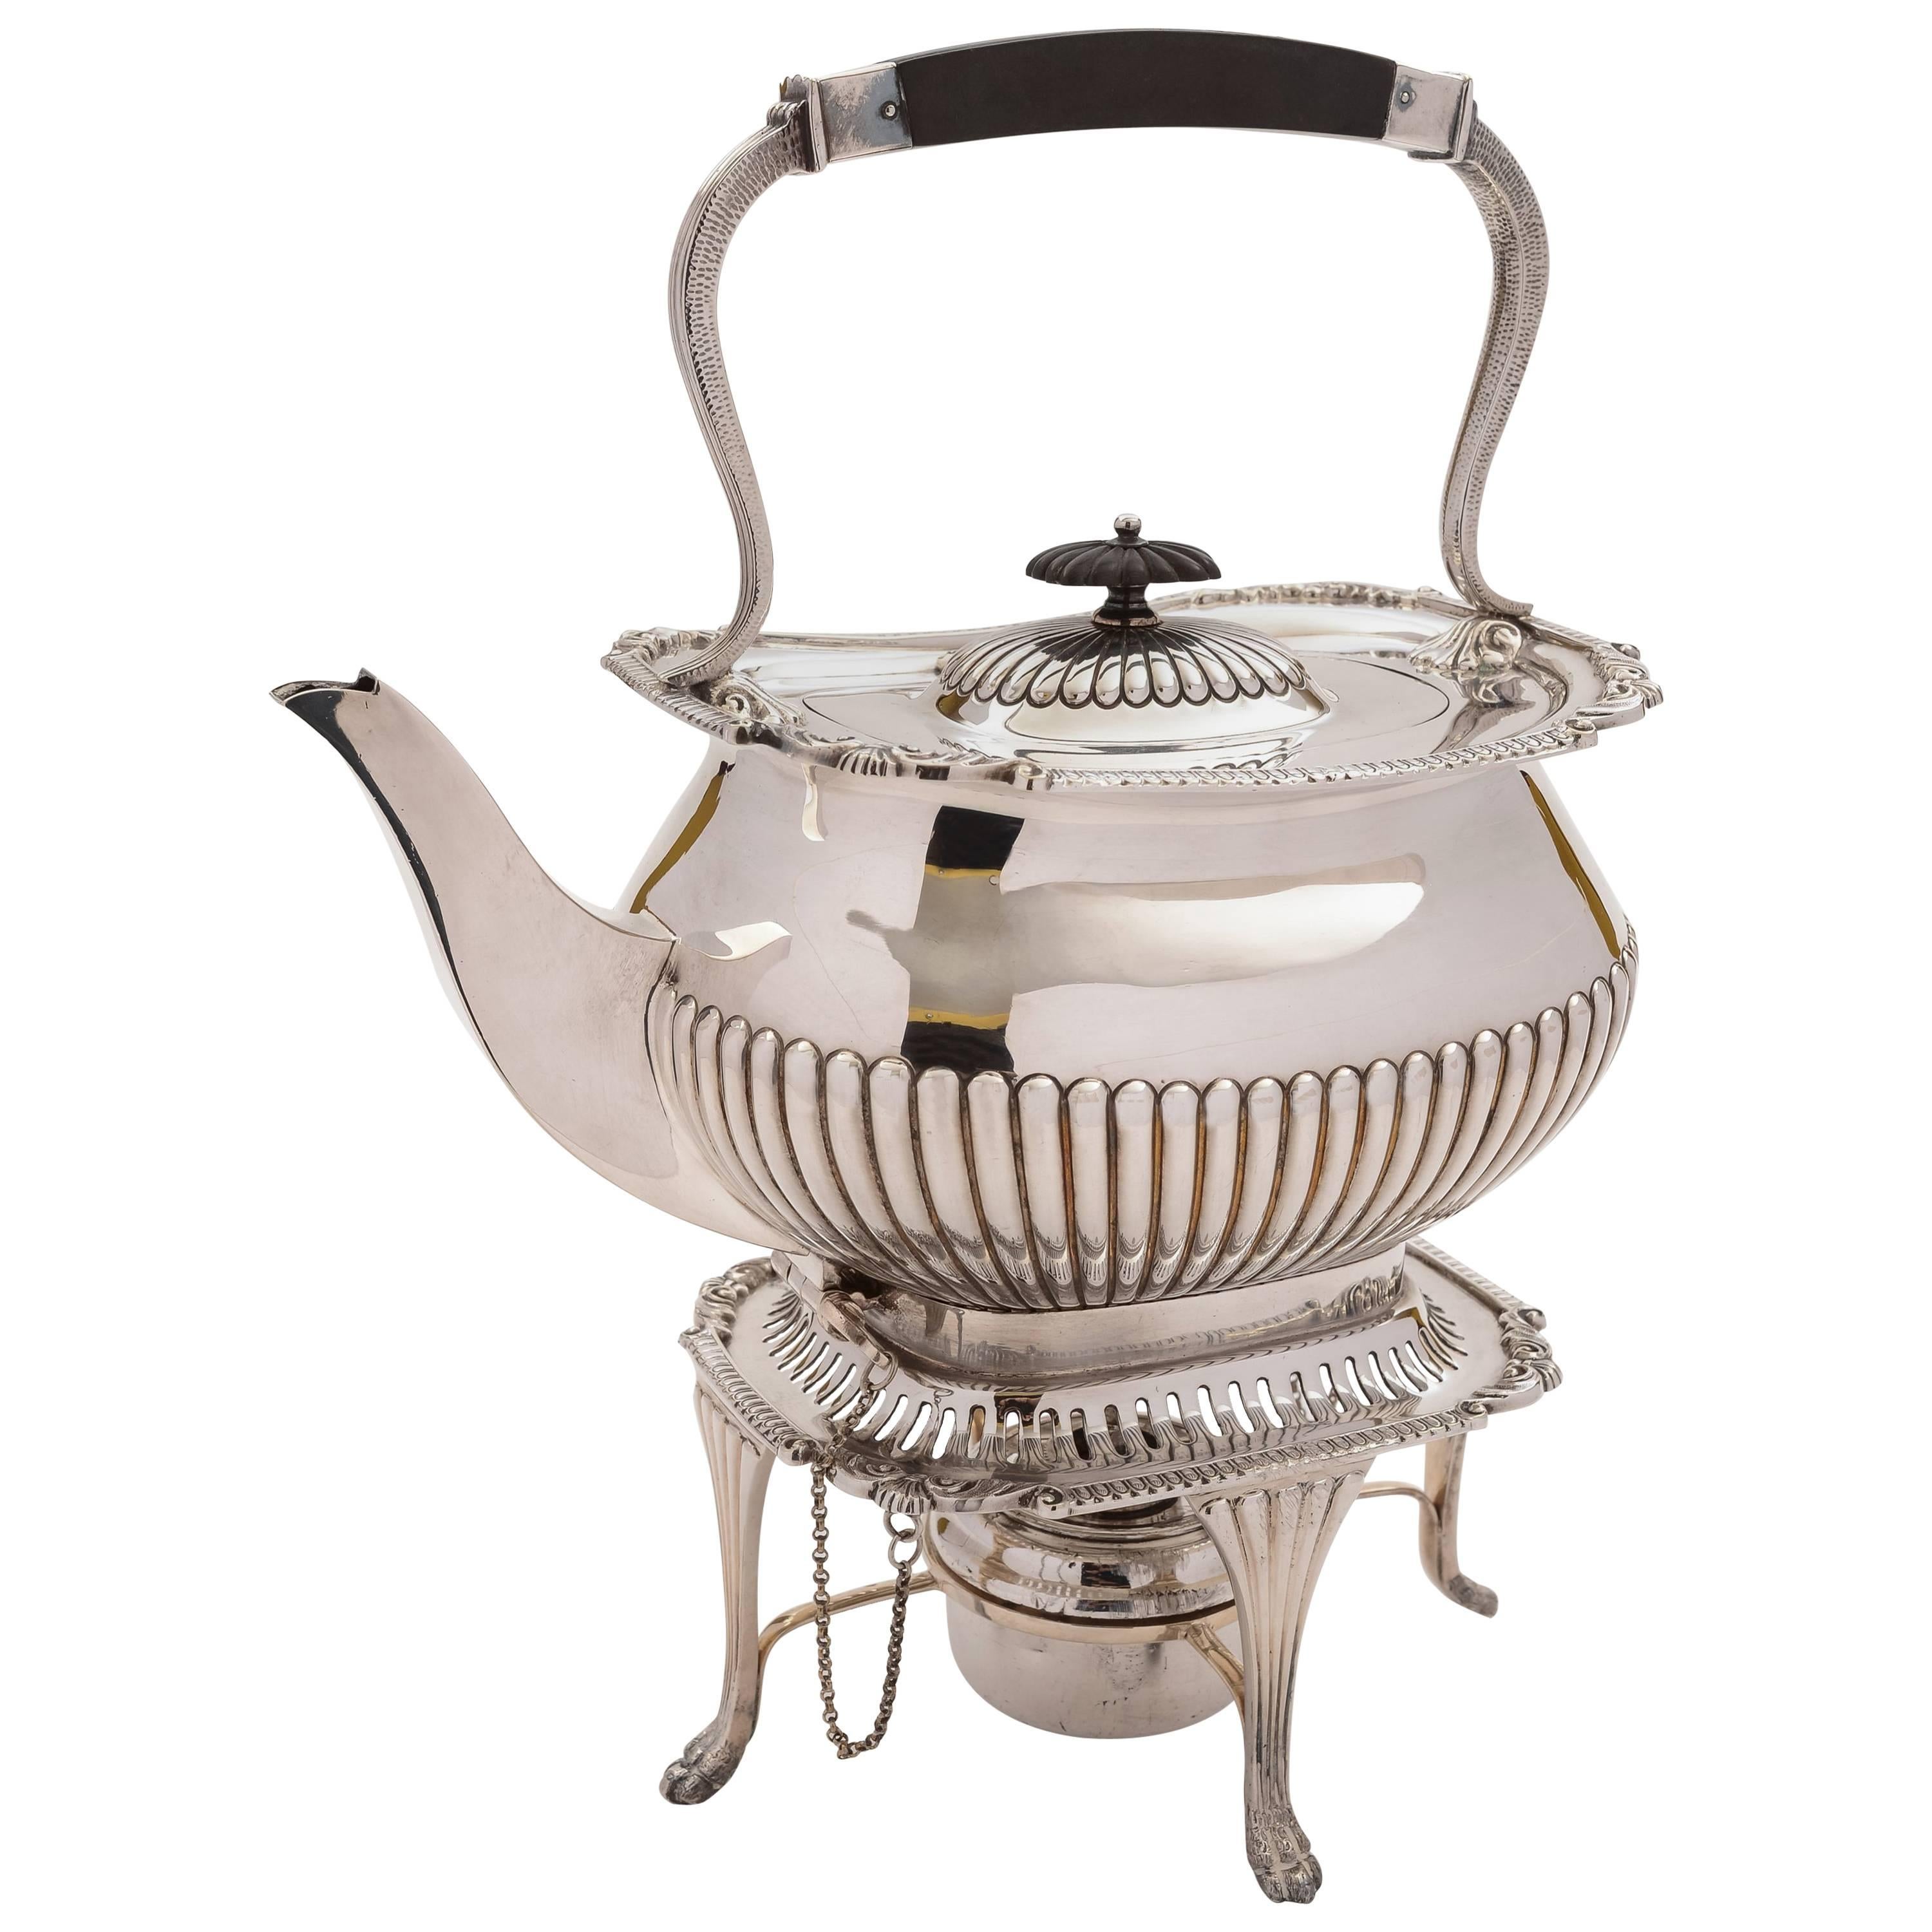 Edwardian Large Silver Plated Kettle on Stand, circa 1905